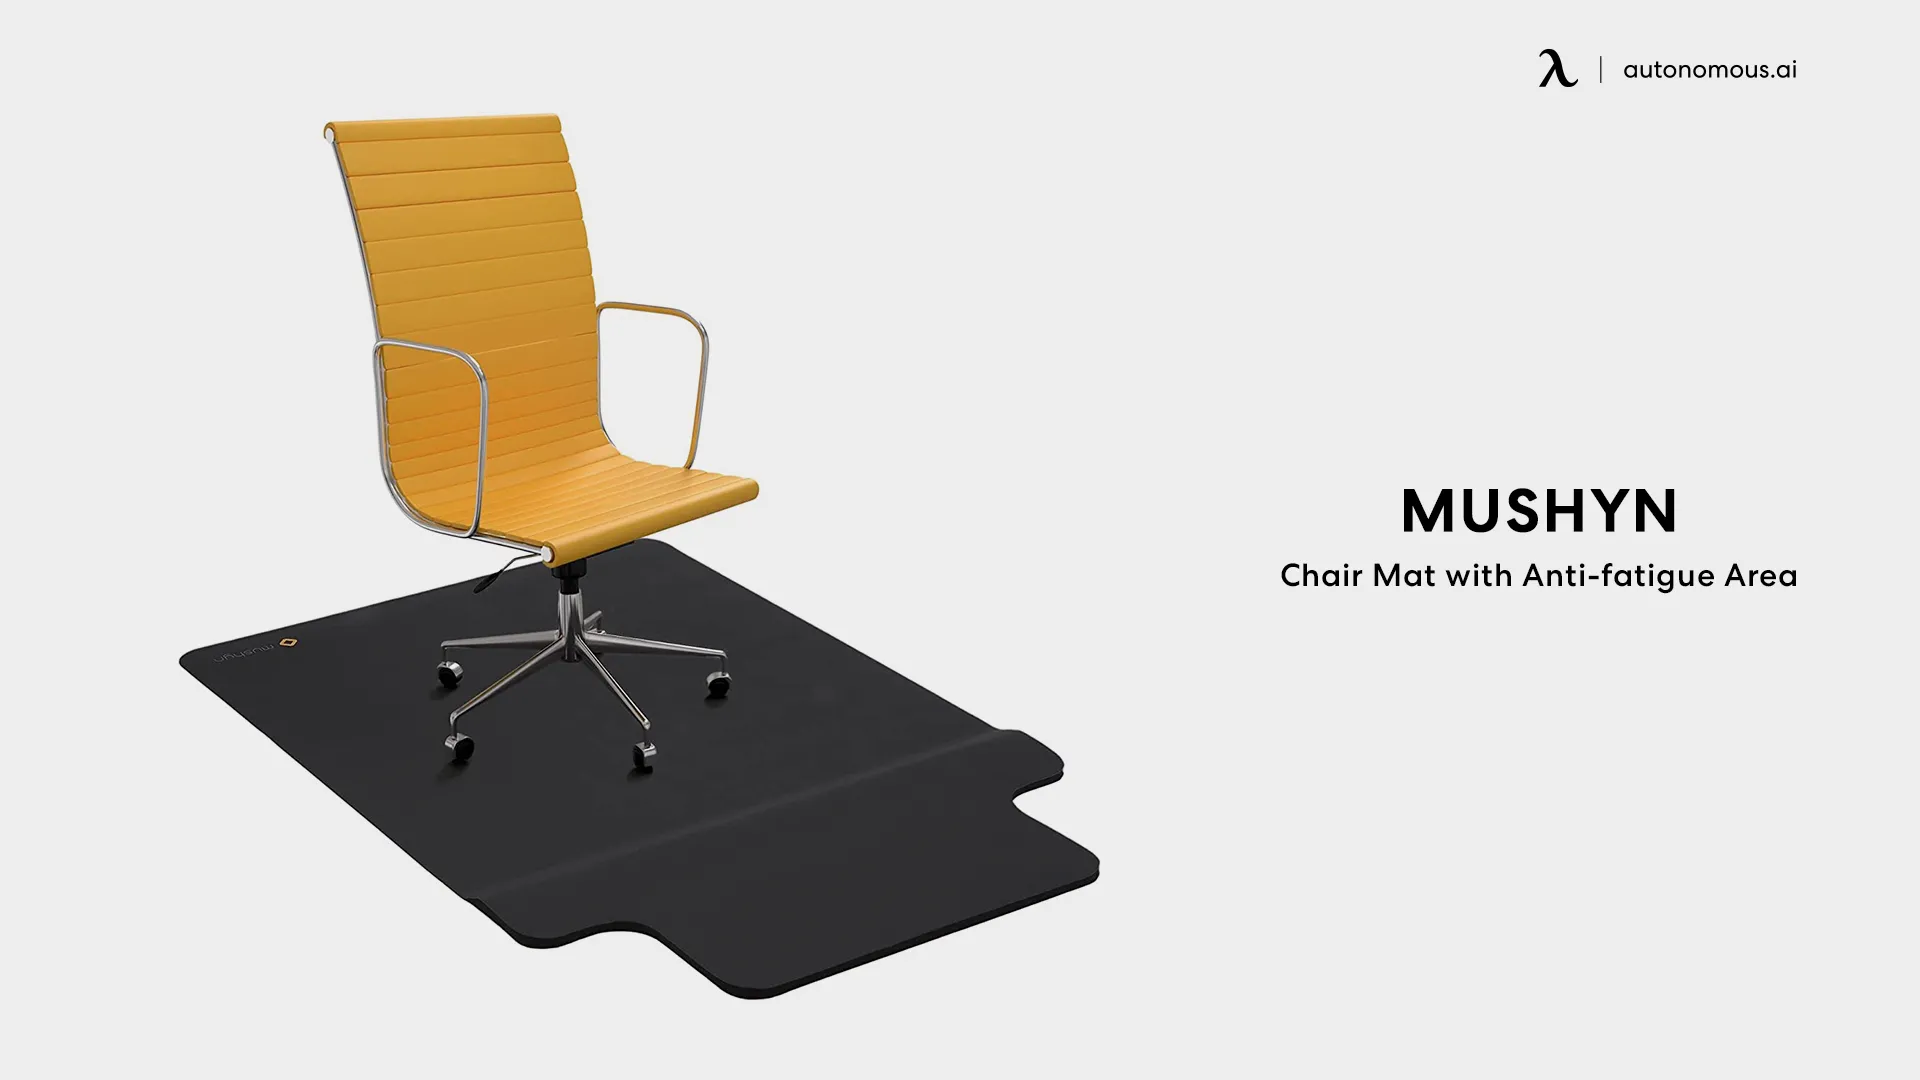 Chair Mat with Anti-fatigue Area by Mushyn